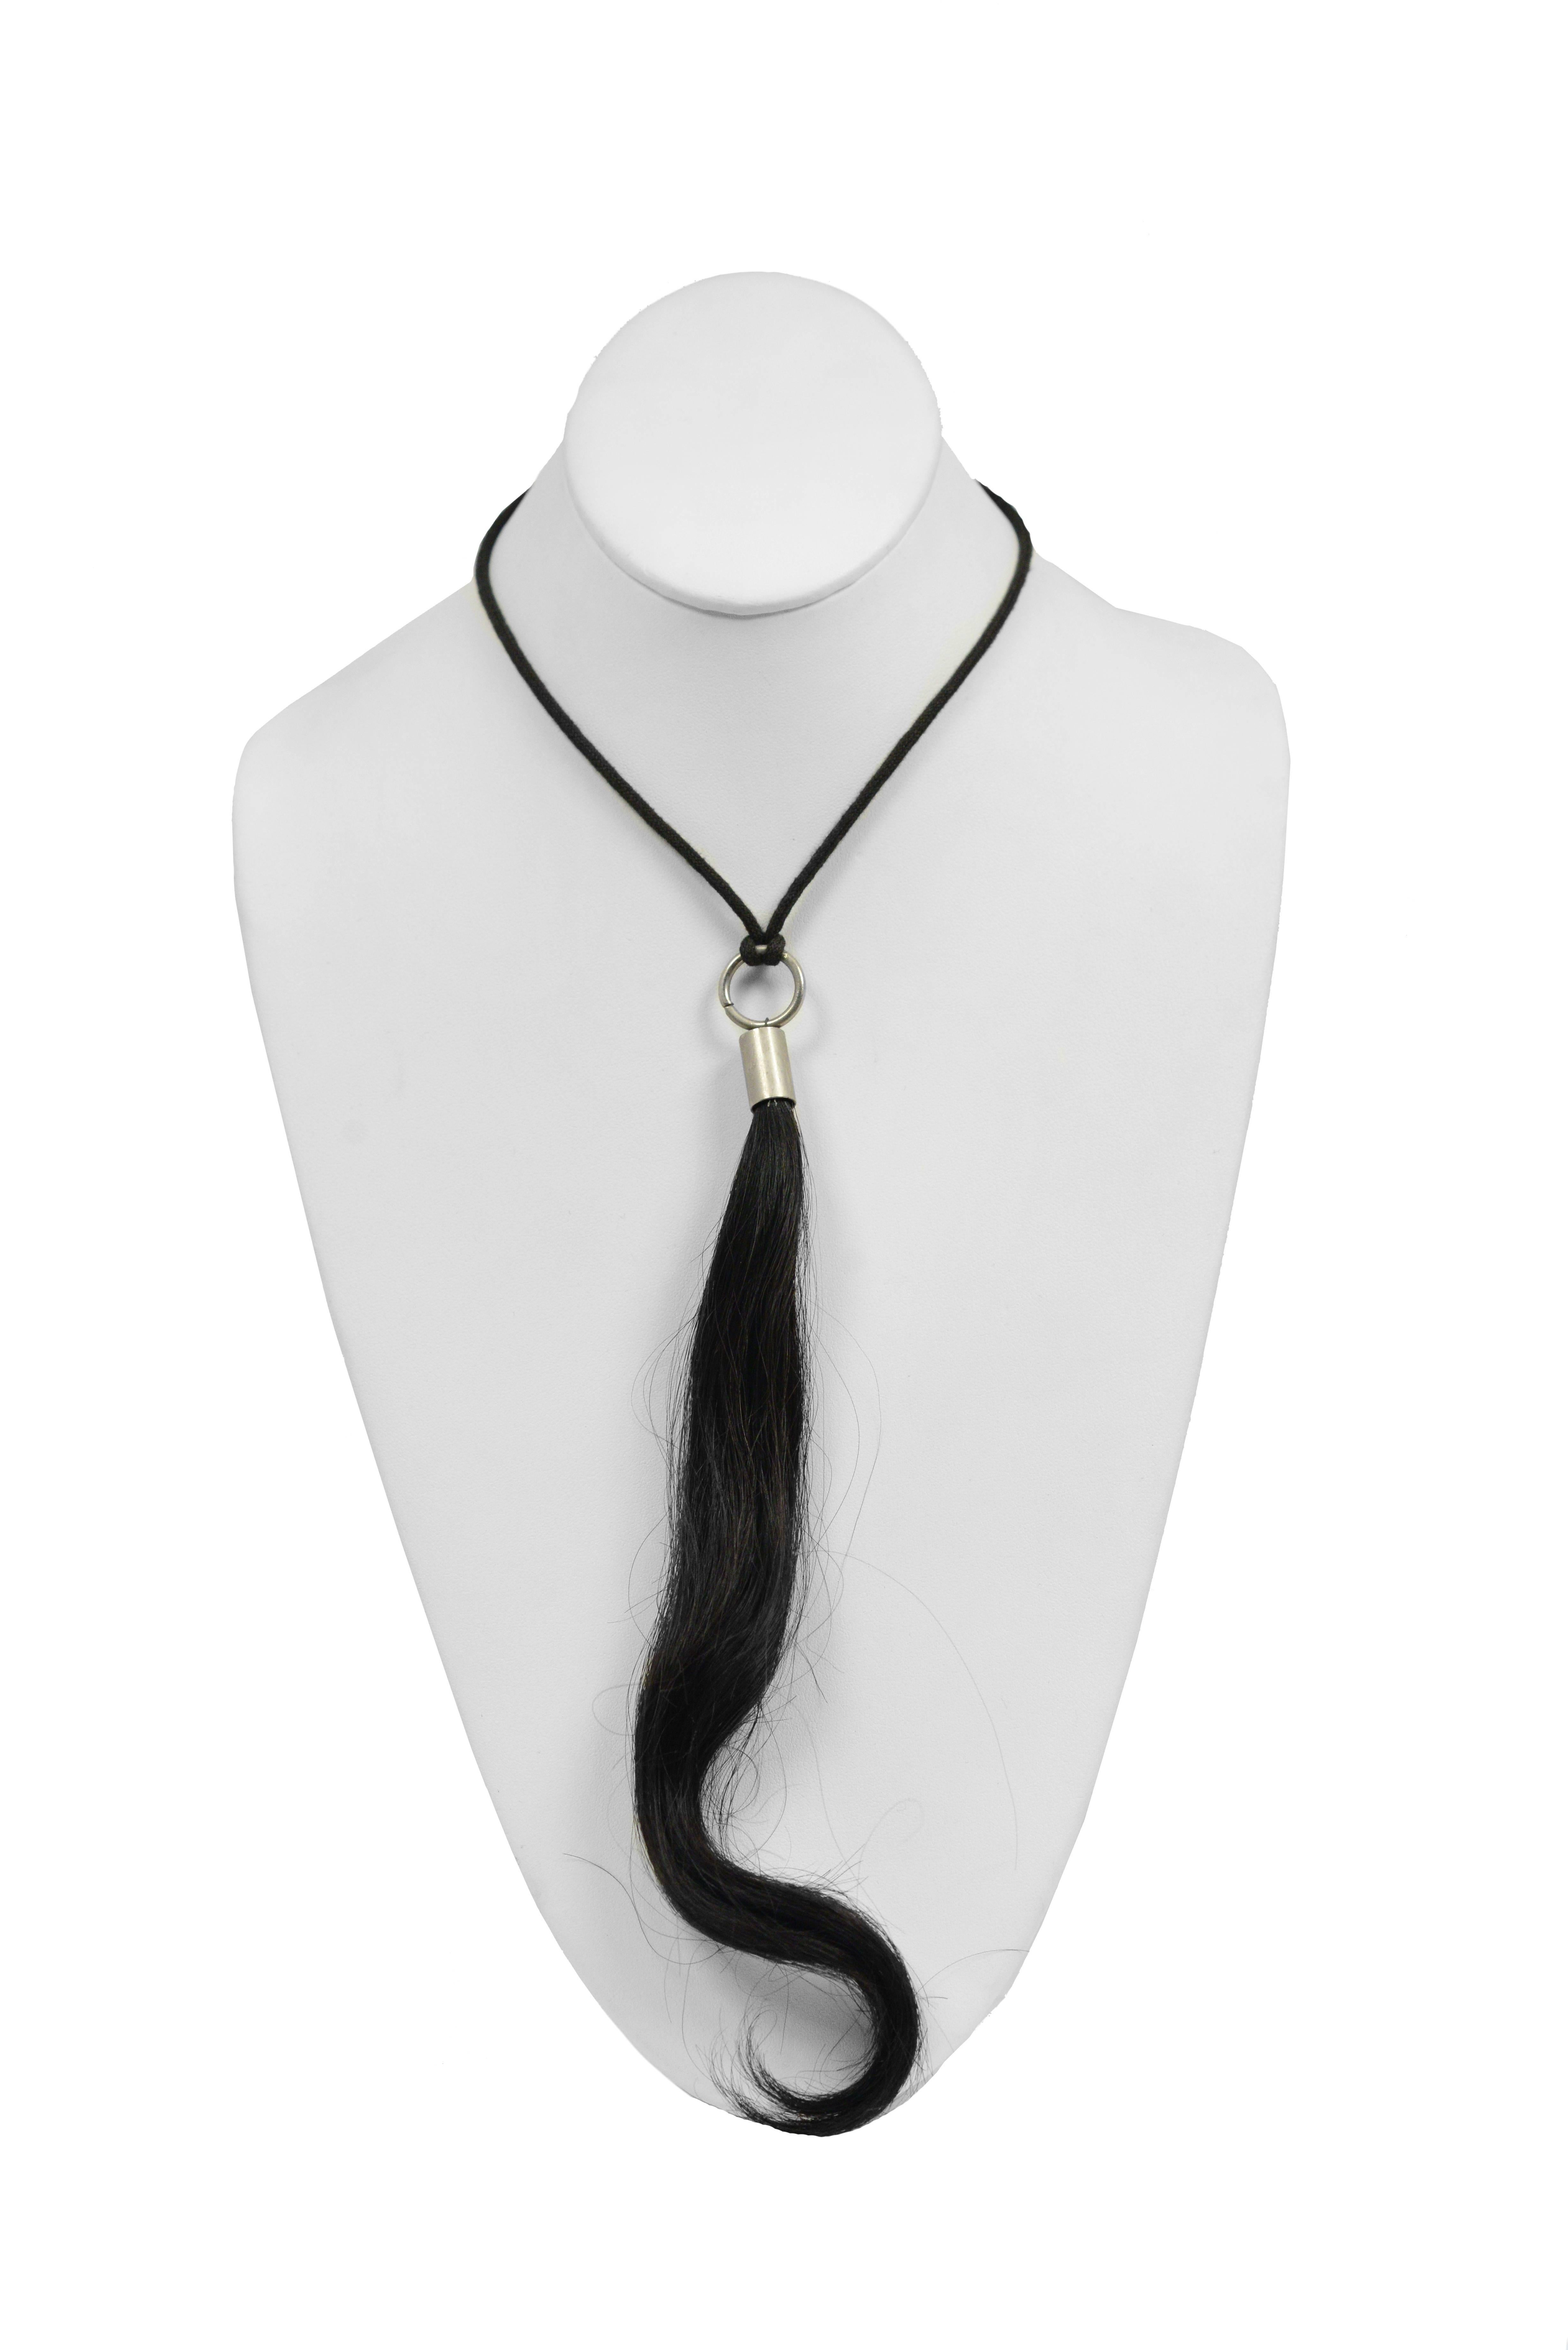 Vintage Maison Martin Margiela black necklace featuring a strand of black hair that hangs from a metal pendant. Circa 1999.
Please inquire for additional images.